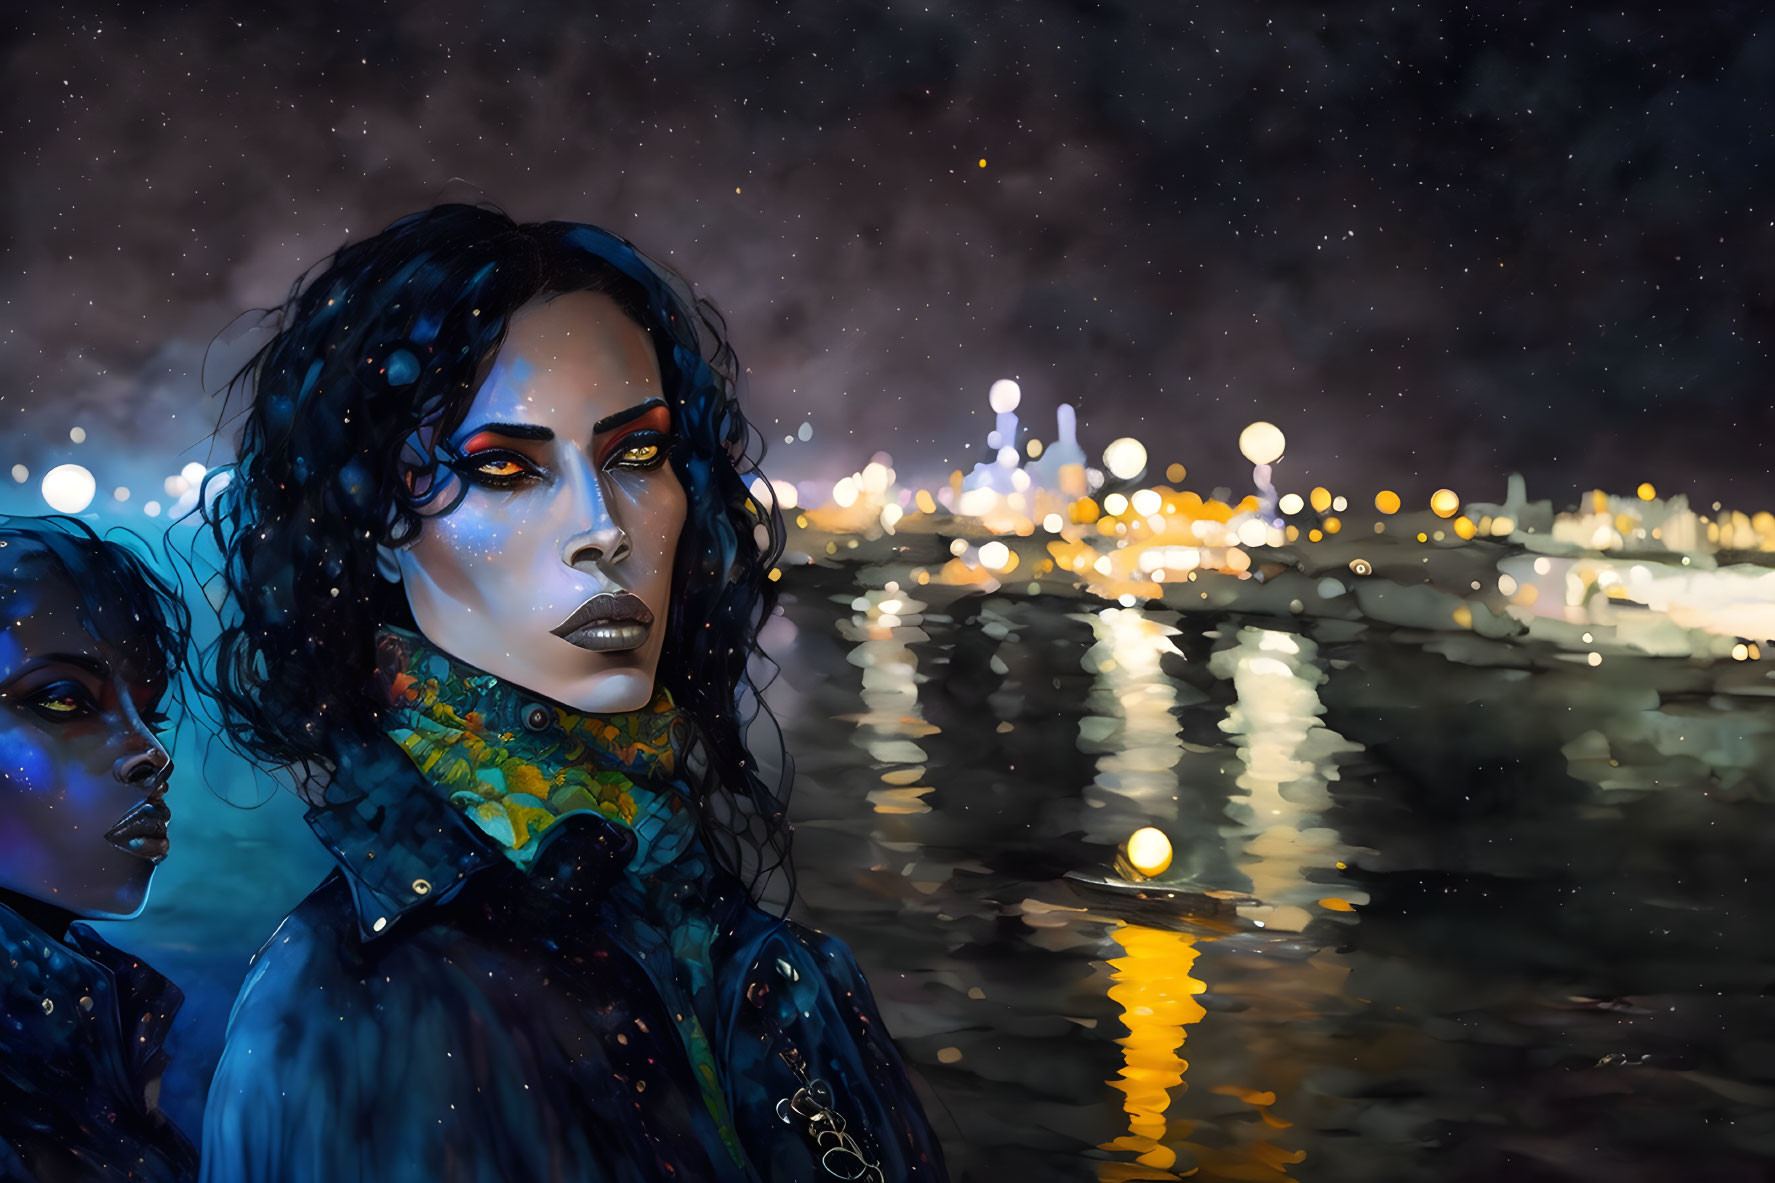 Stylized women with blue skin tones in night cityscape reflection